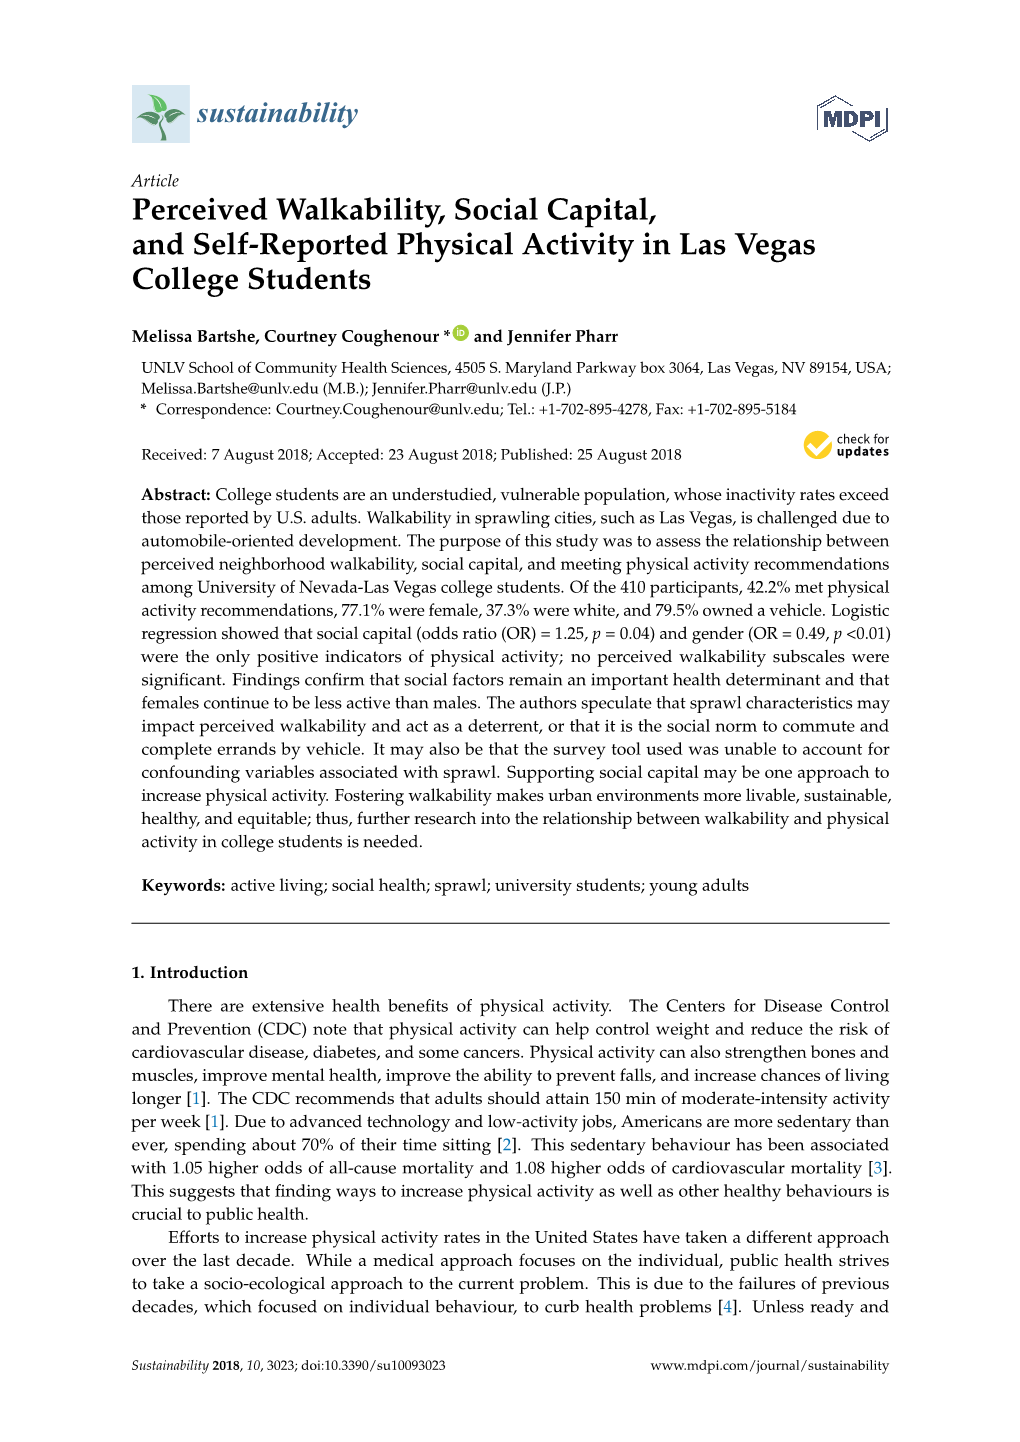 Perceived Walkability, Social Capital, and Self-Reported Physical Activity in Las Vegas College Students